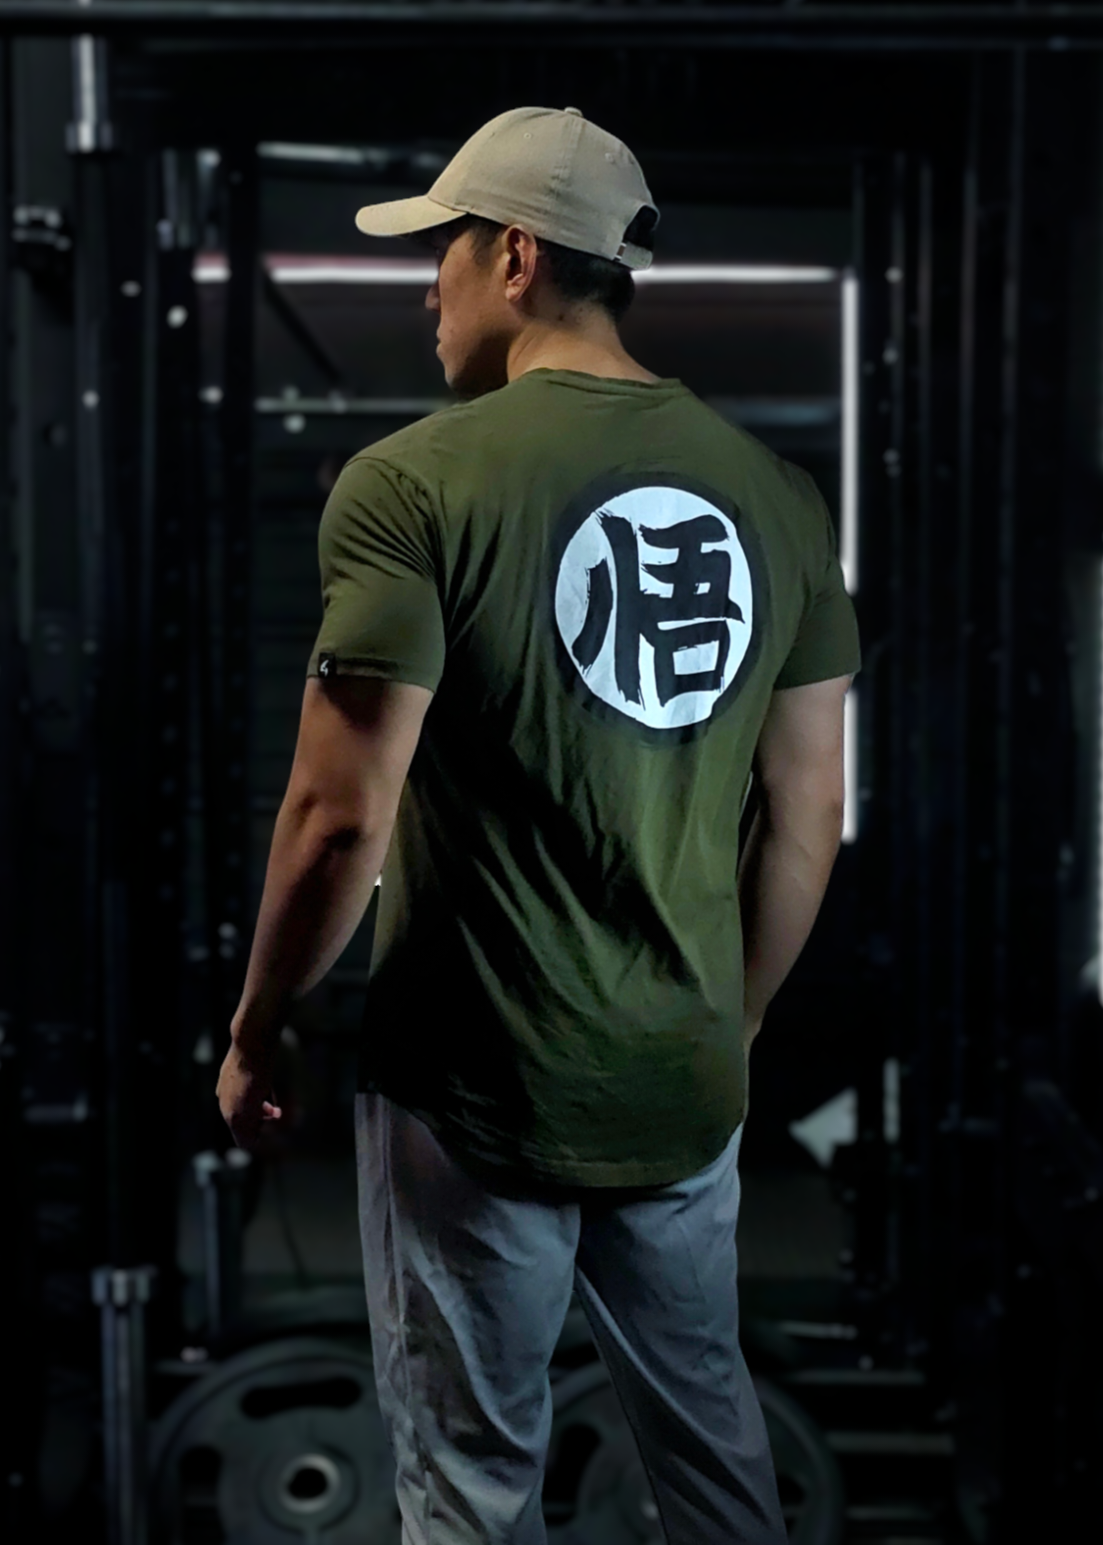 [NEW ARRIVAL] V2.0 'Ascension' Performance T-Shirt - Army Green